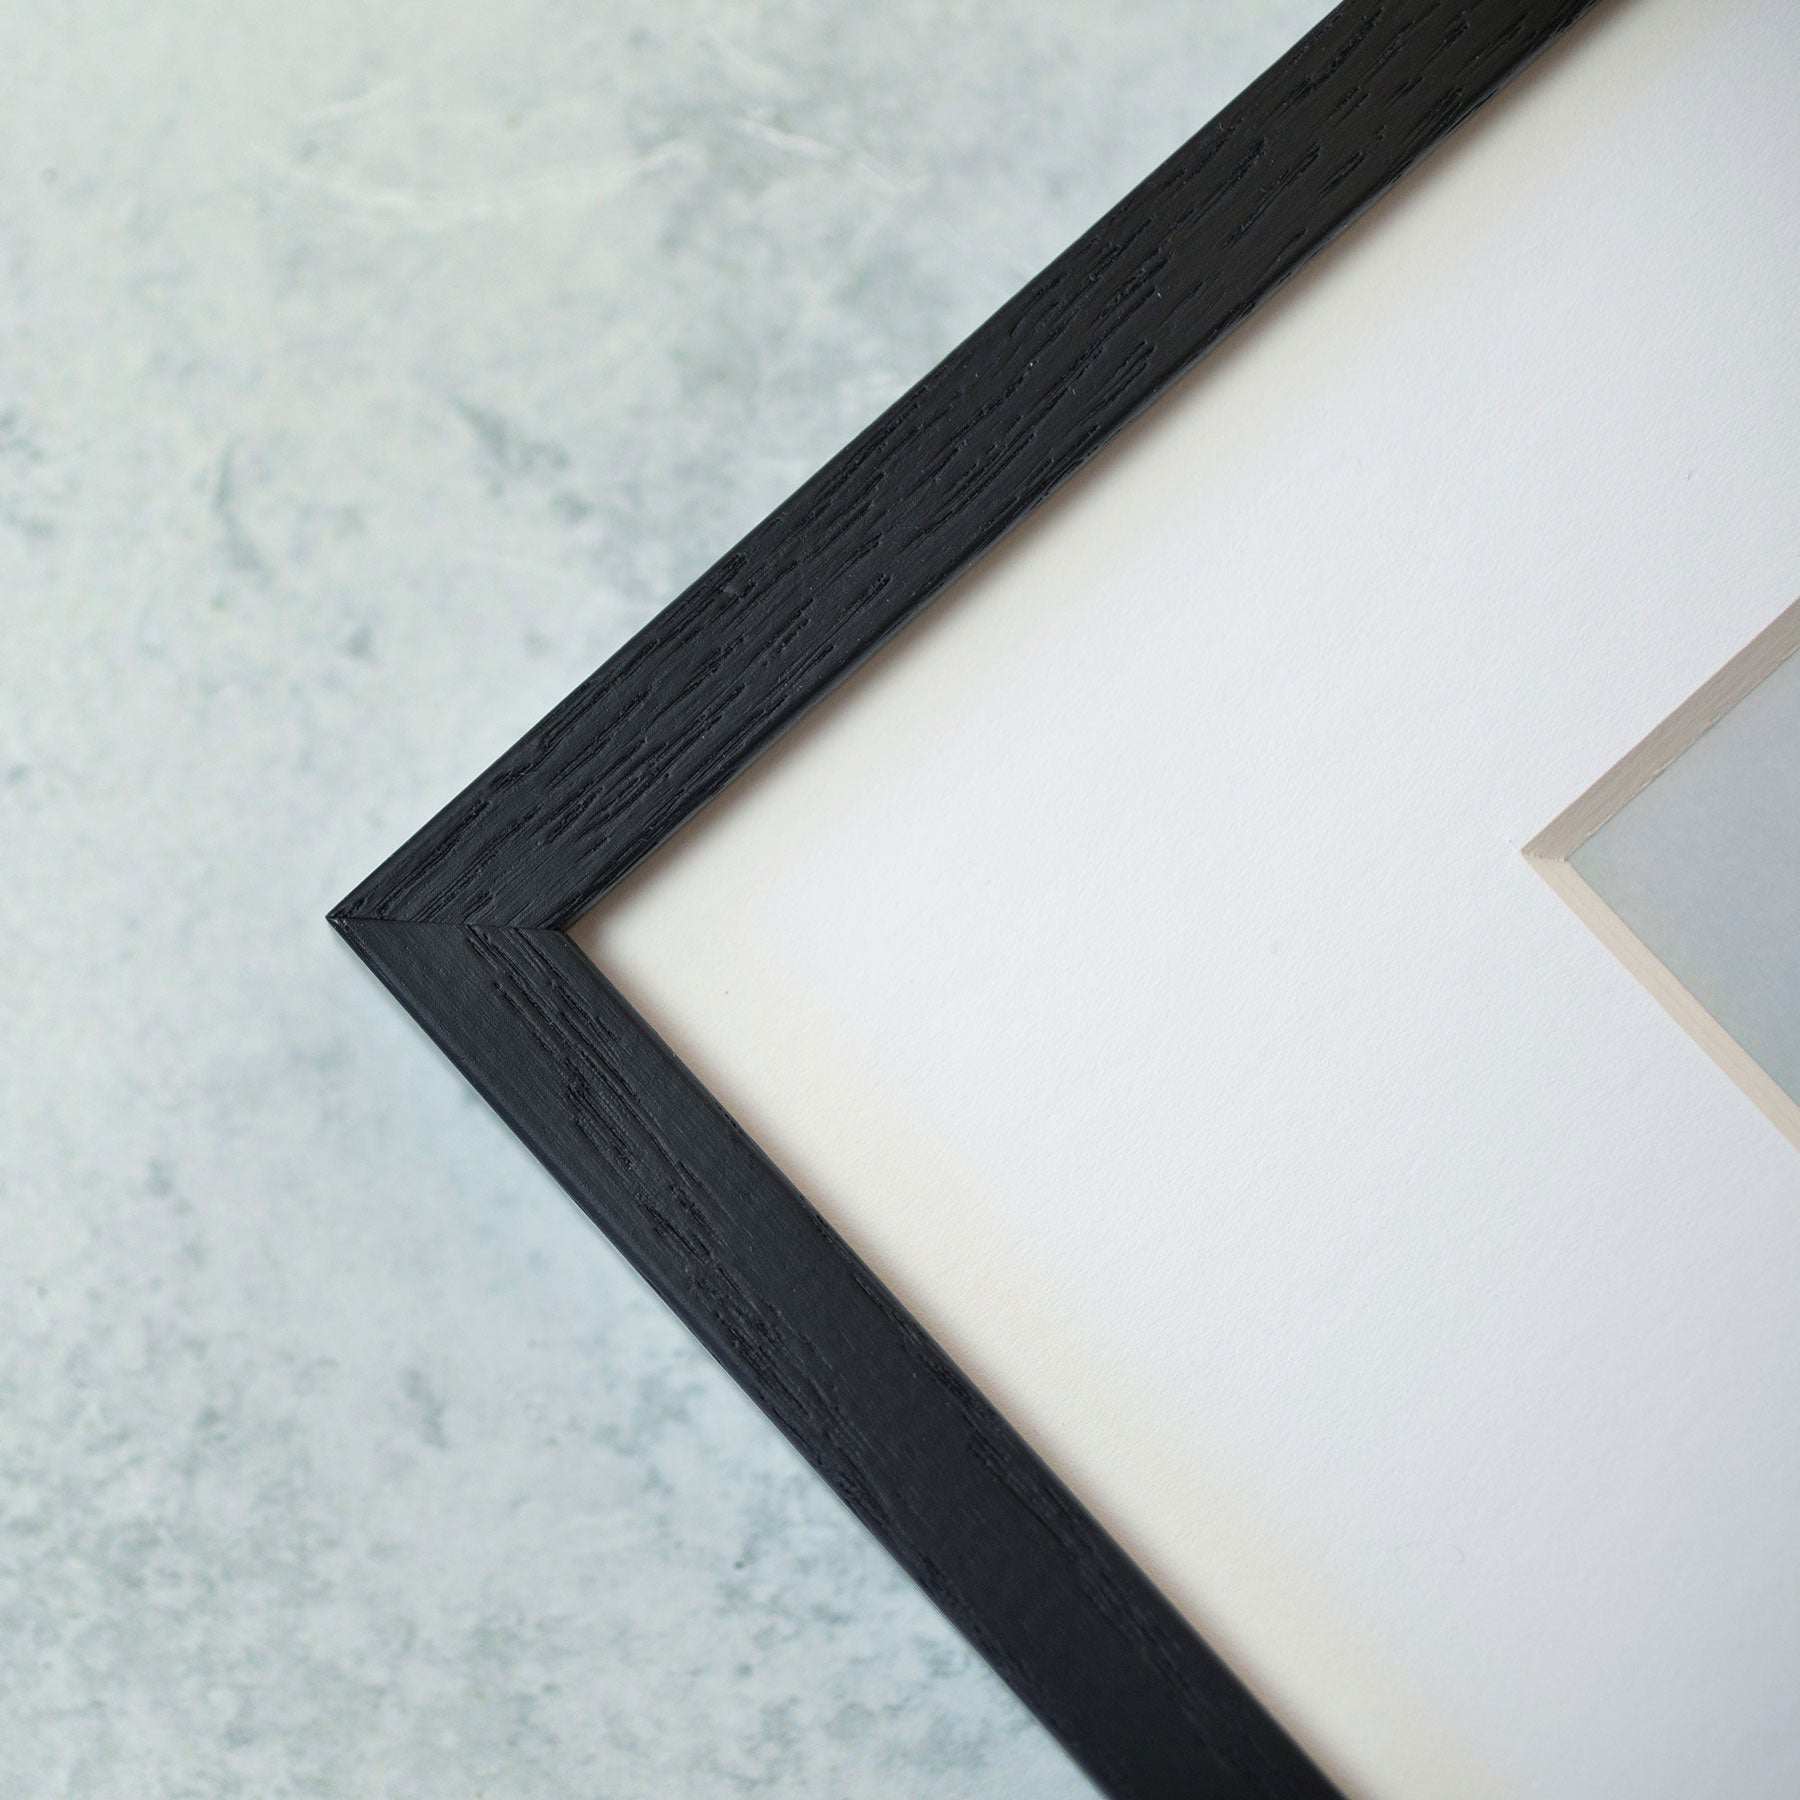 A close-up view of the corner of a picture frame. The frame, made of black wood with visible grain texture, surrounds a white matte border containing the Rustic Countryside Print, 'Tree in a Field' by Offley Green. The background is a textured light gray surface reminiscent of storm clouds.